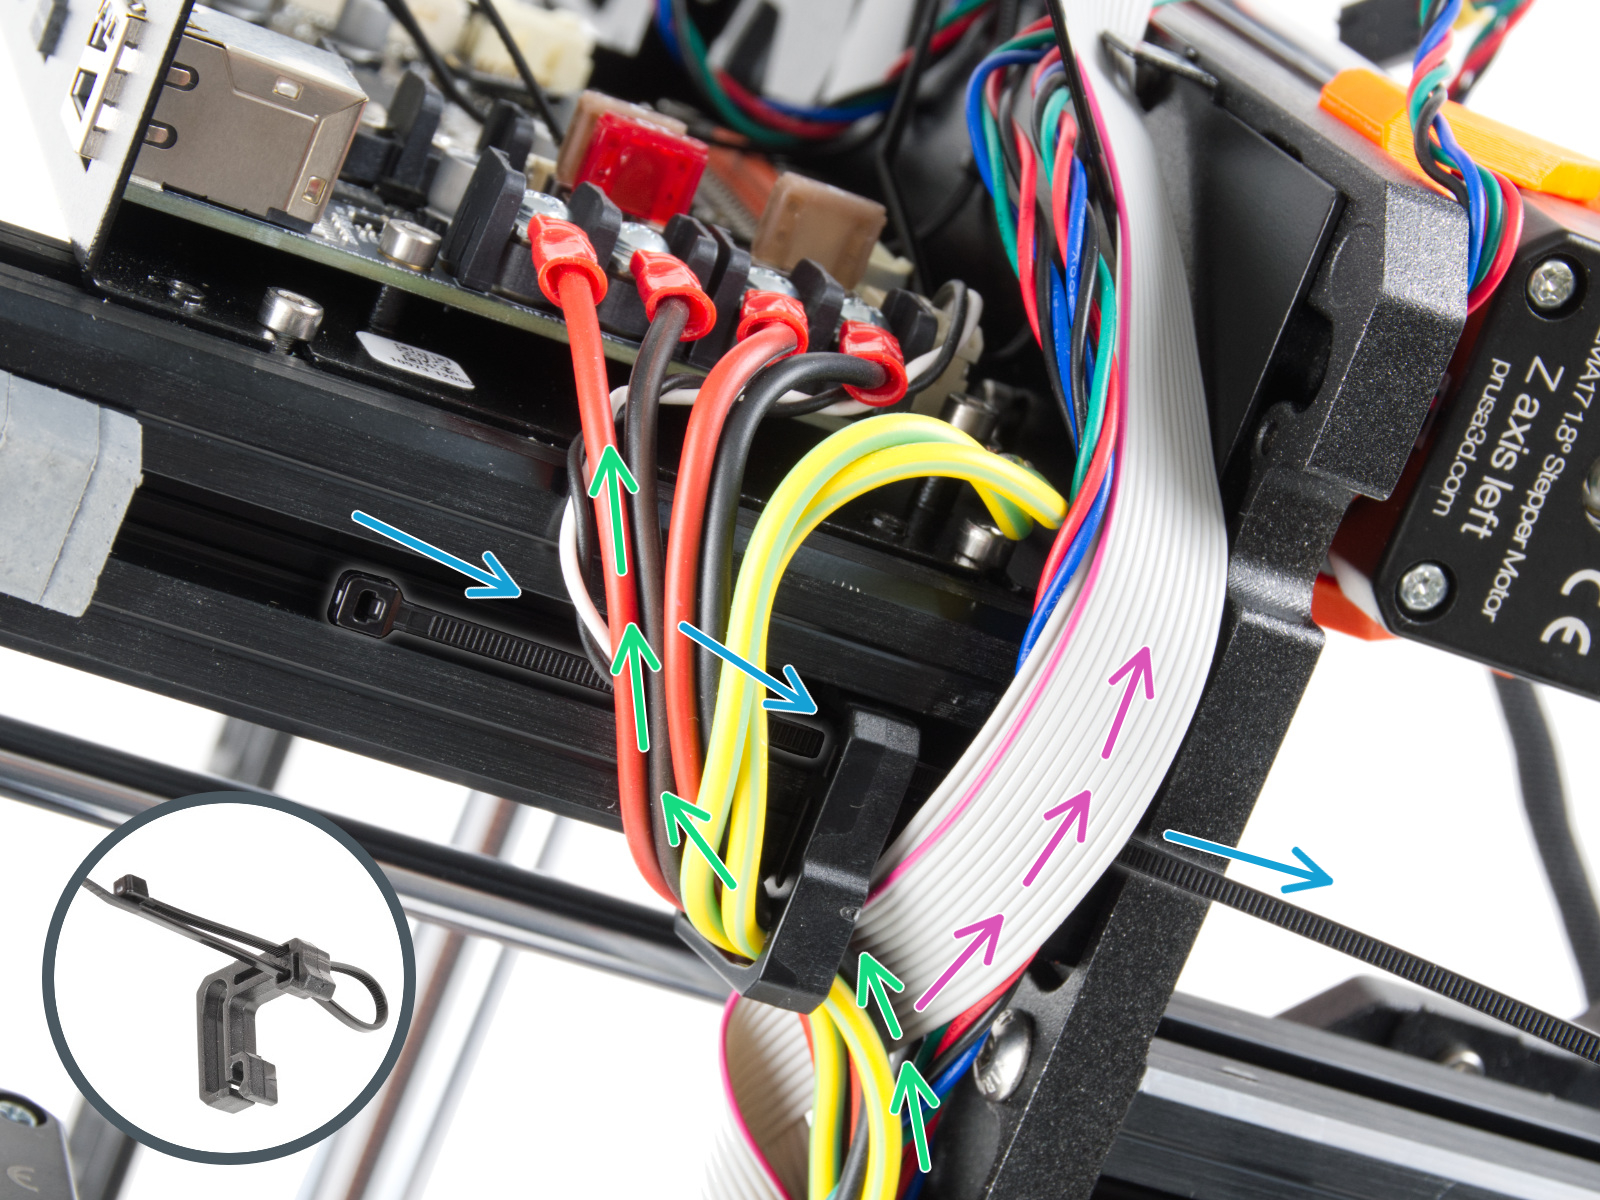 Securing the PSU cables